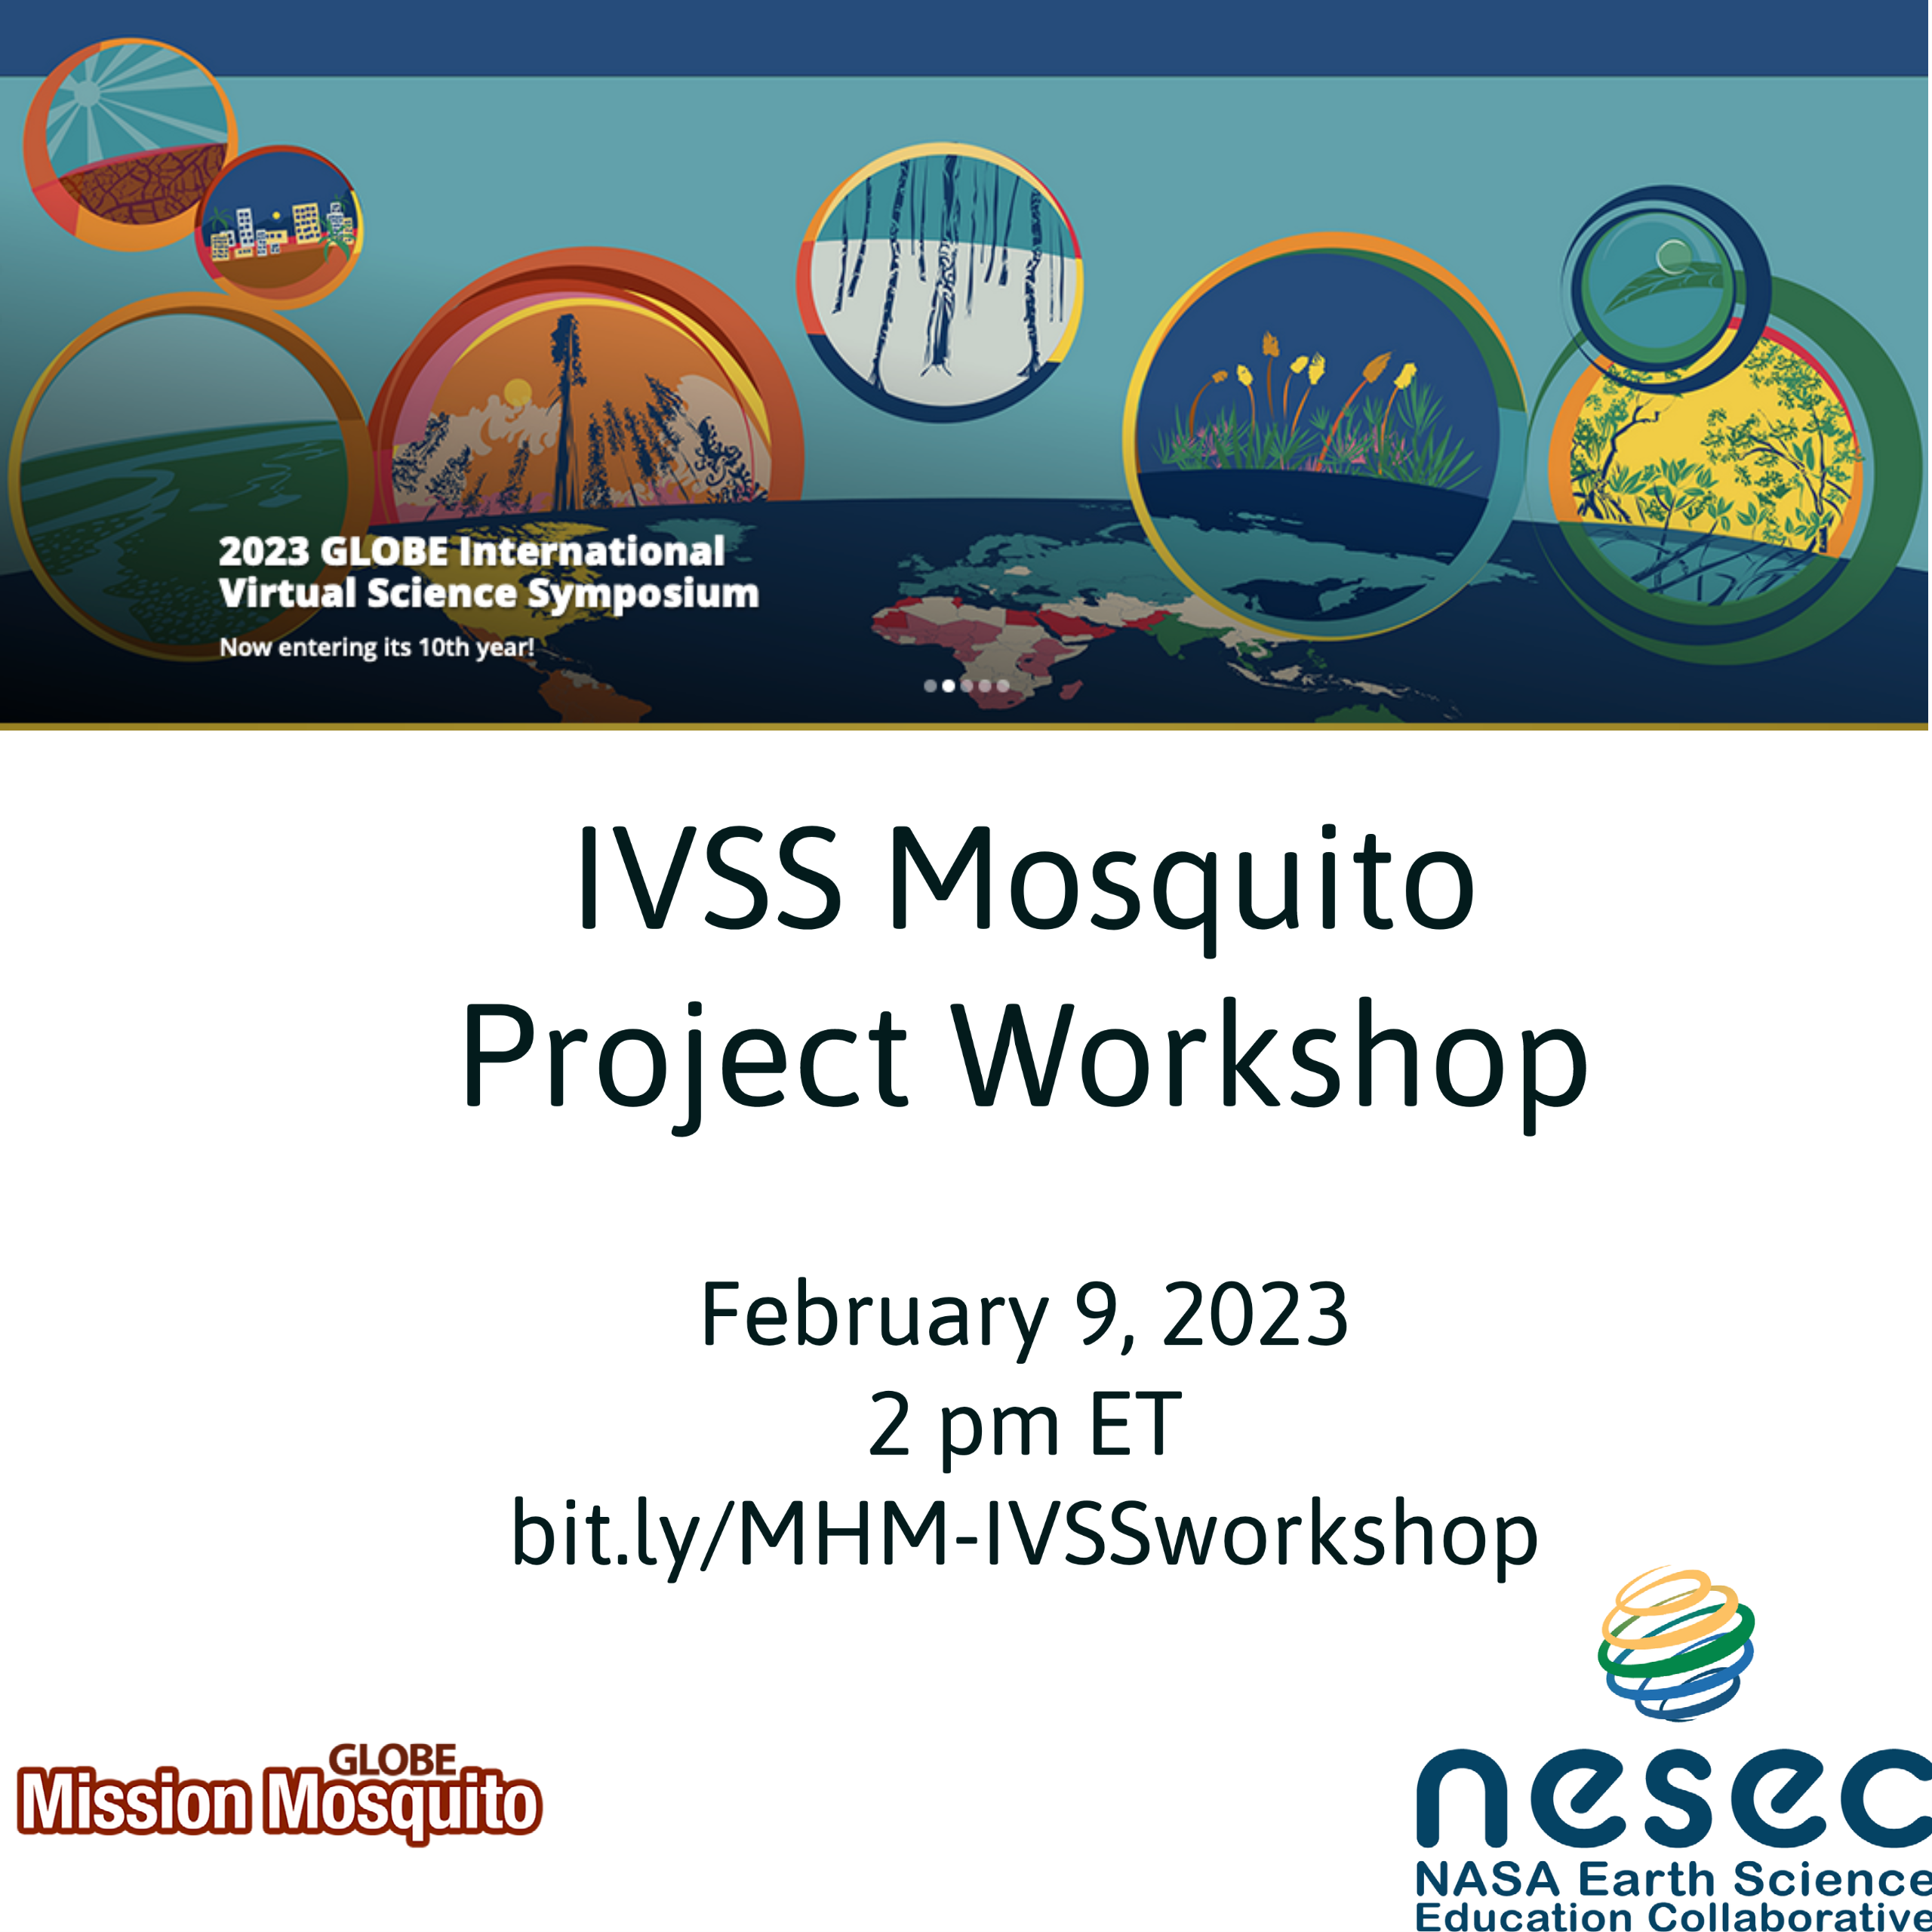 GLOBE Mission Mosquito 07 February webinar shareable, showing the time and date of the event